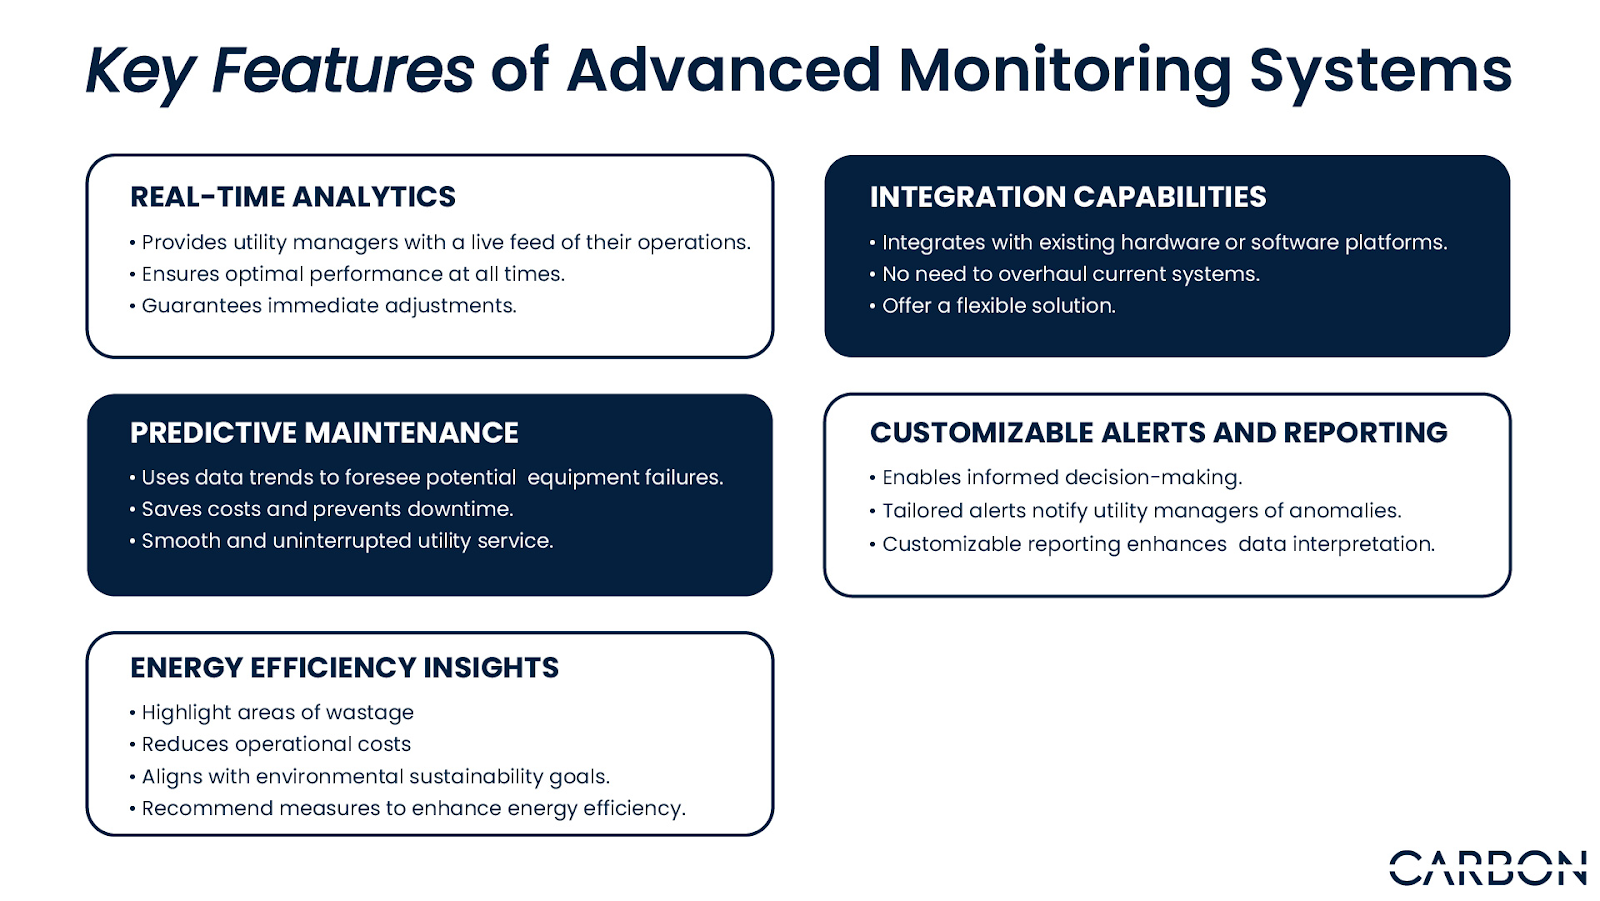 Key Features of Advanced Monitoring Systems